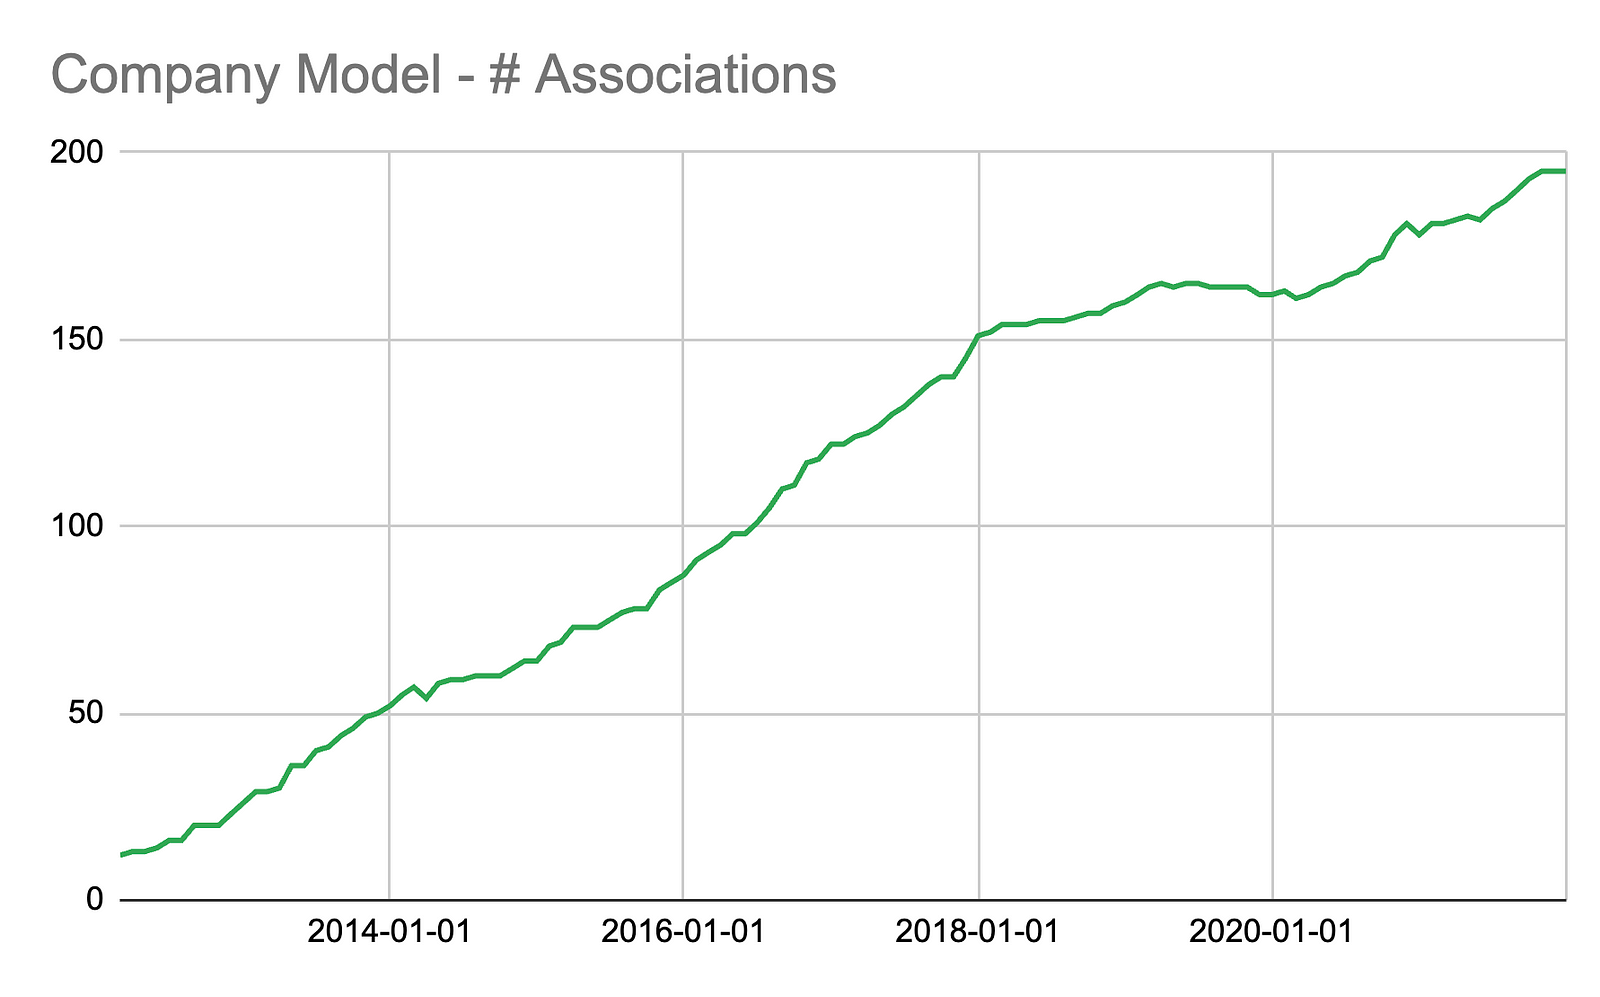 Graph shows the number of assocations on the company model over time. It’s getting bigger.